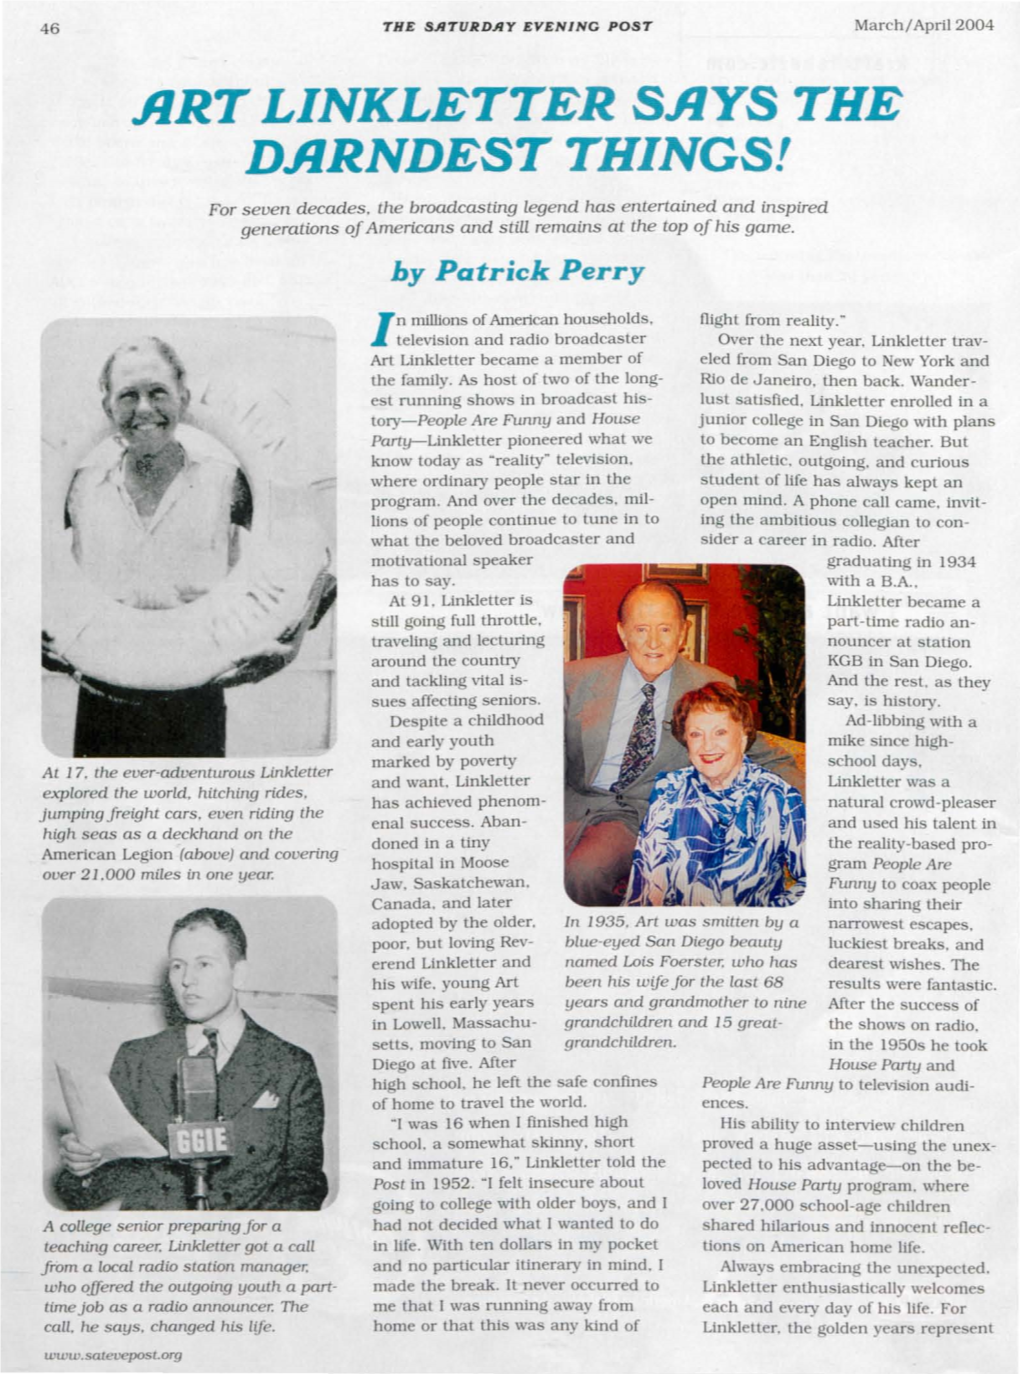 “Art Linkletter Says the Darndest Things!” by Patrick Perry, March